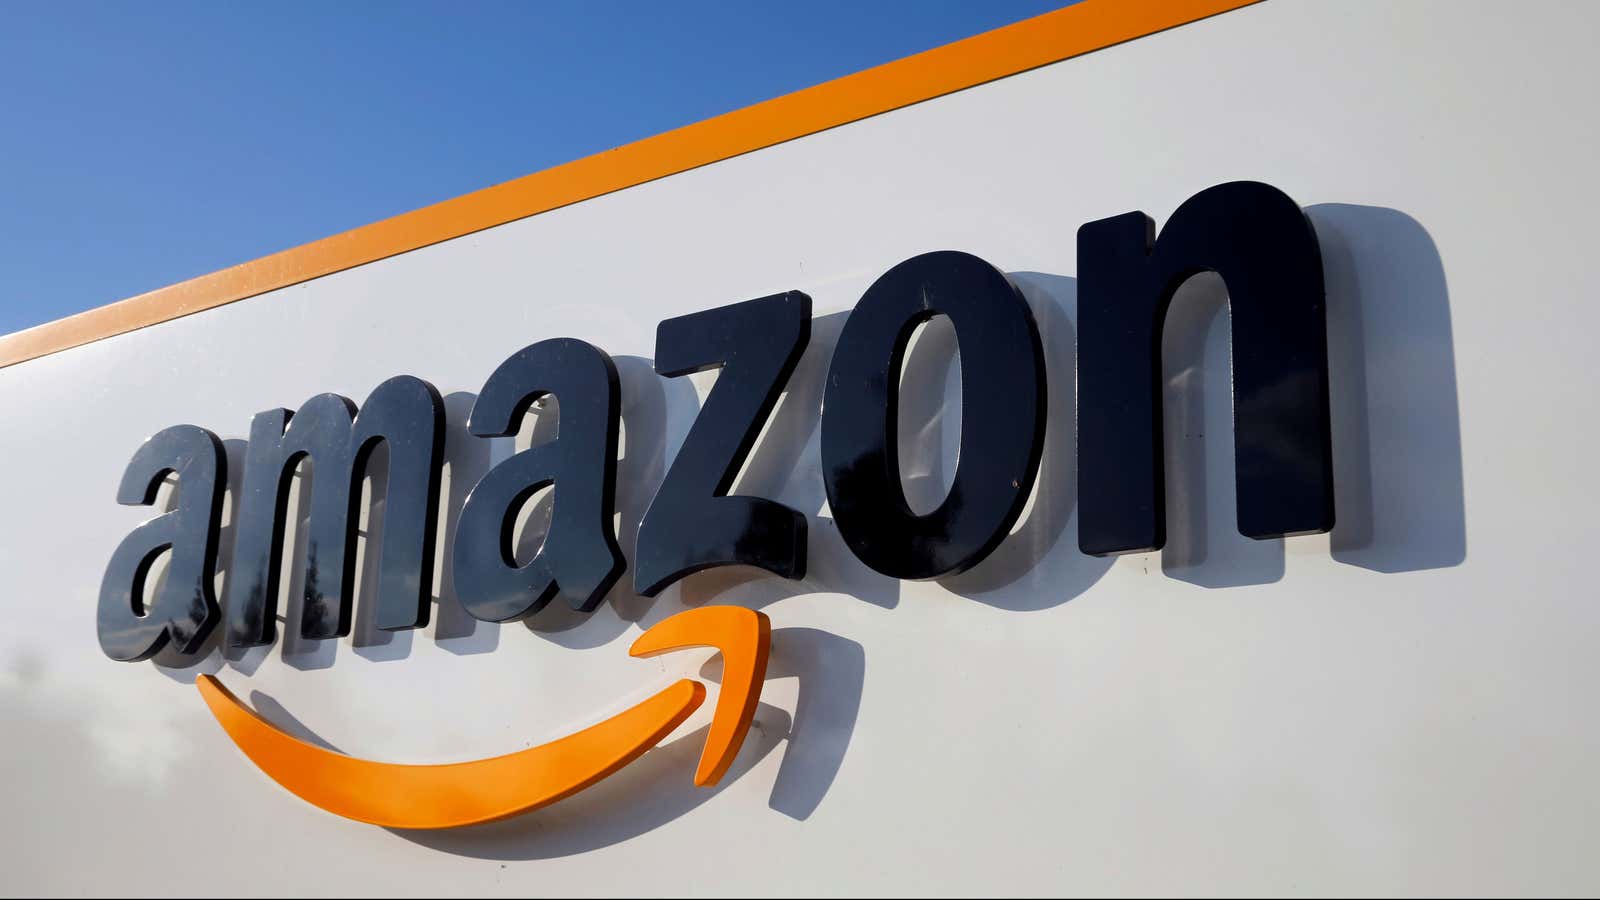 Amazon admits sales of fakes on its site are a risk.